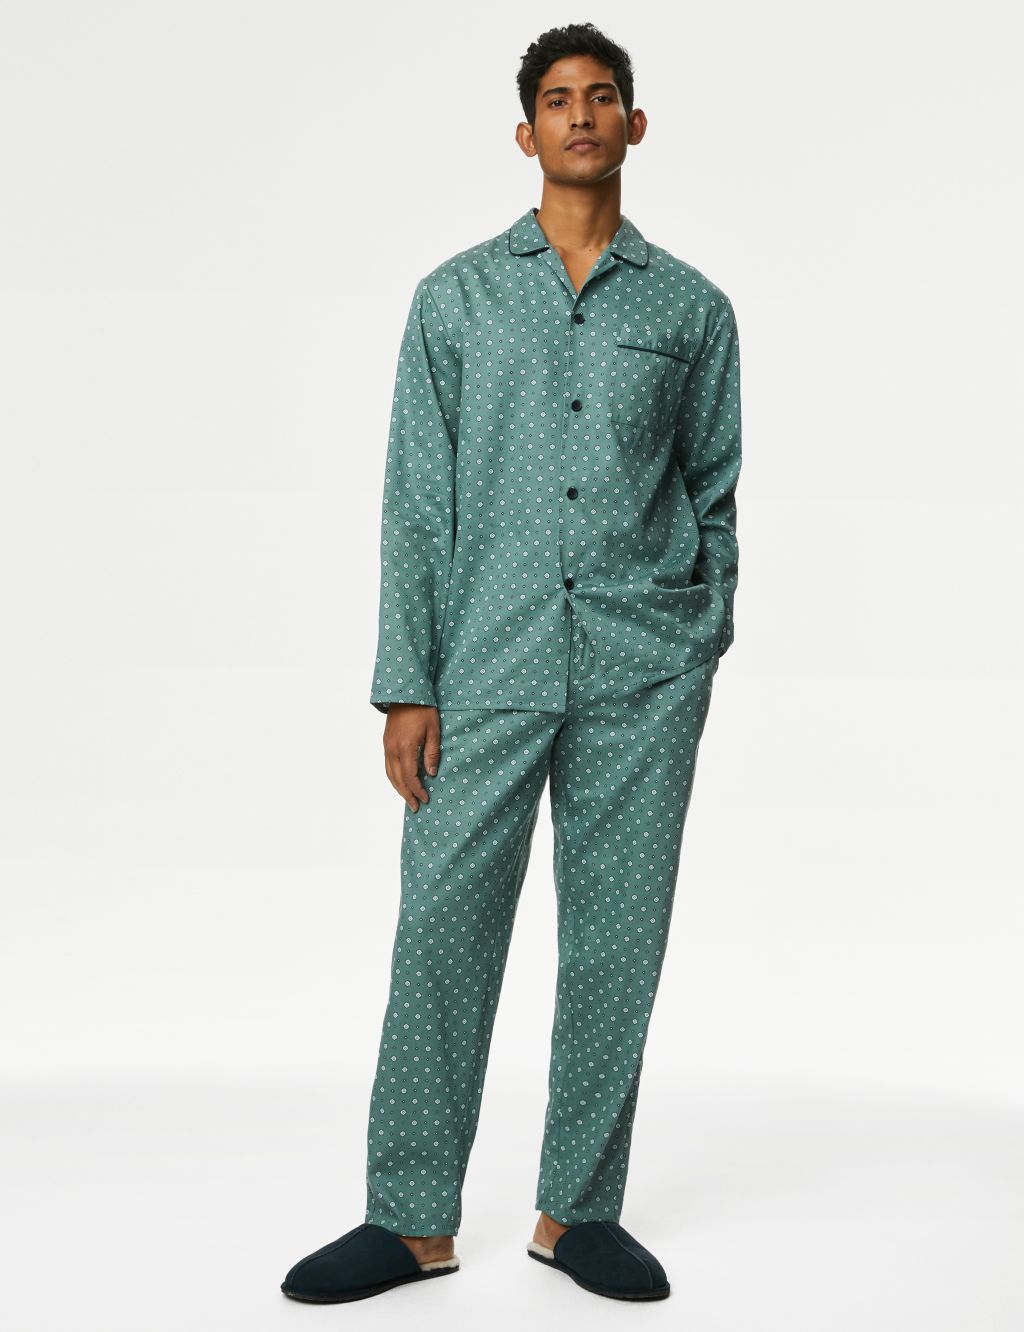 Brushed Cotton Pyjama Trouser - Surf, Spaced Dotty